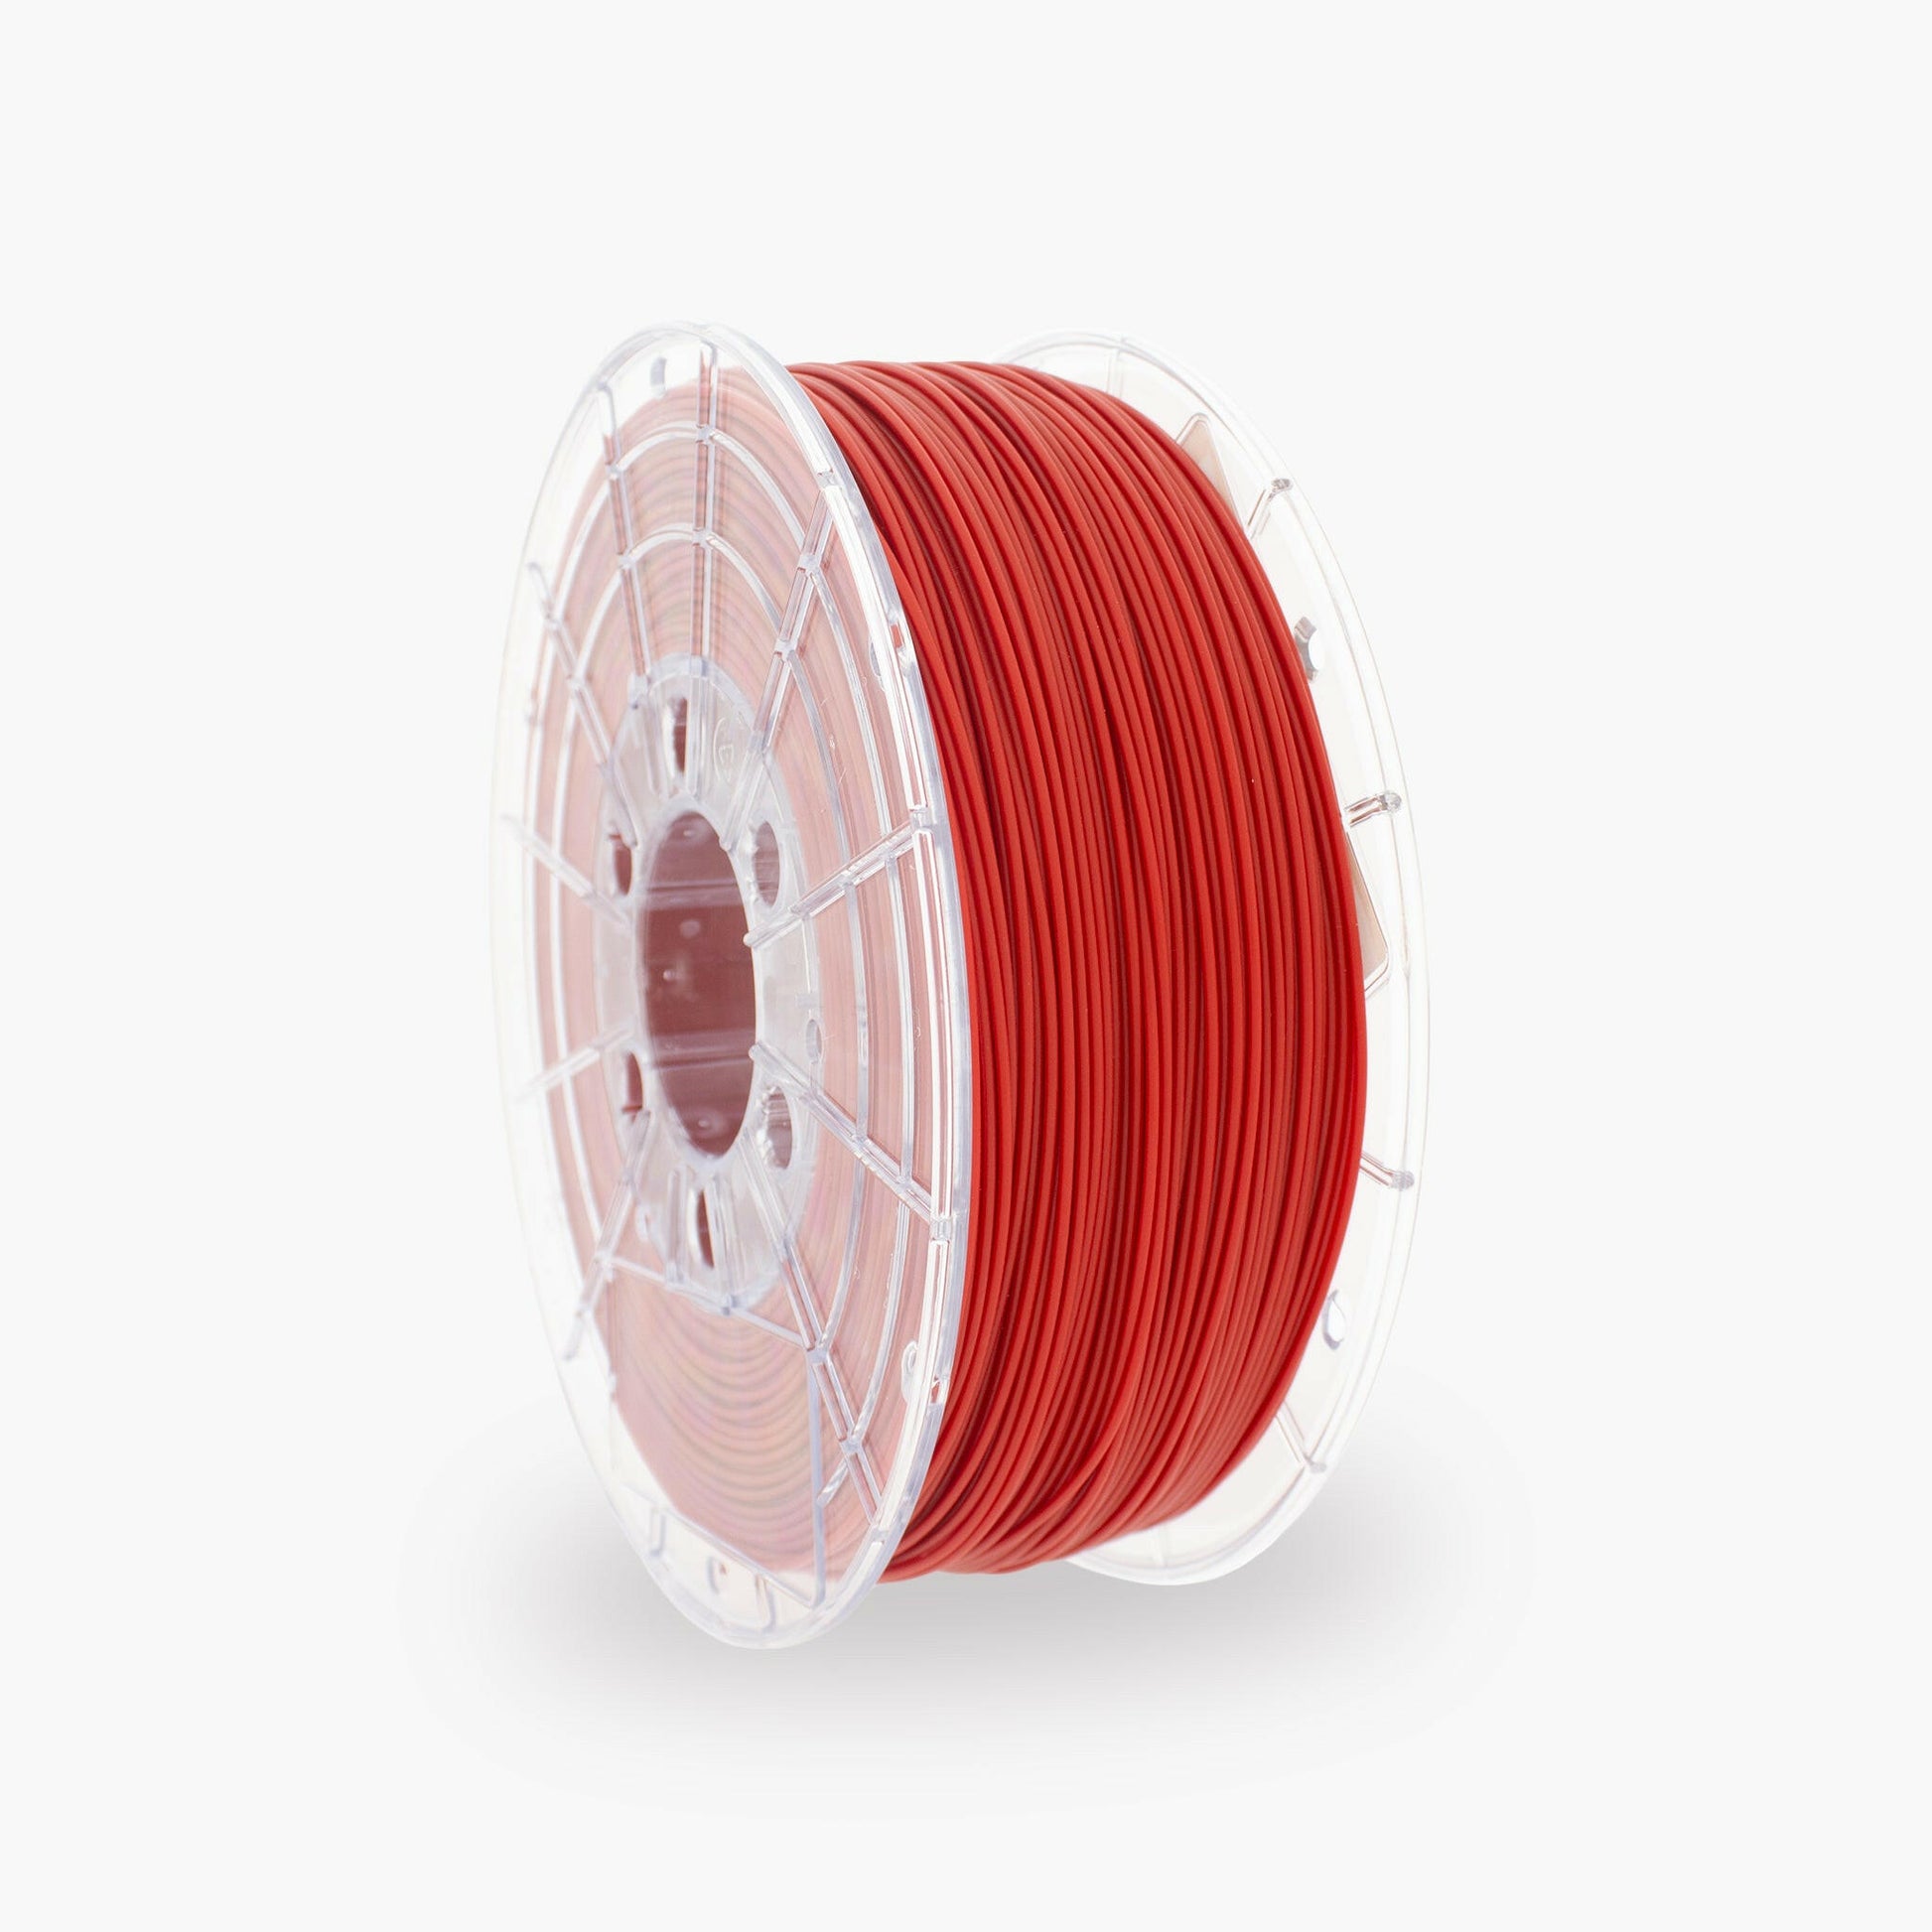 Signal Red PLA 3D Printer Filament with a diameter of 1.75mm on a 1KG Spool.